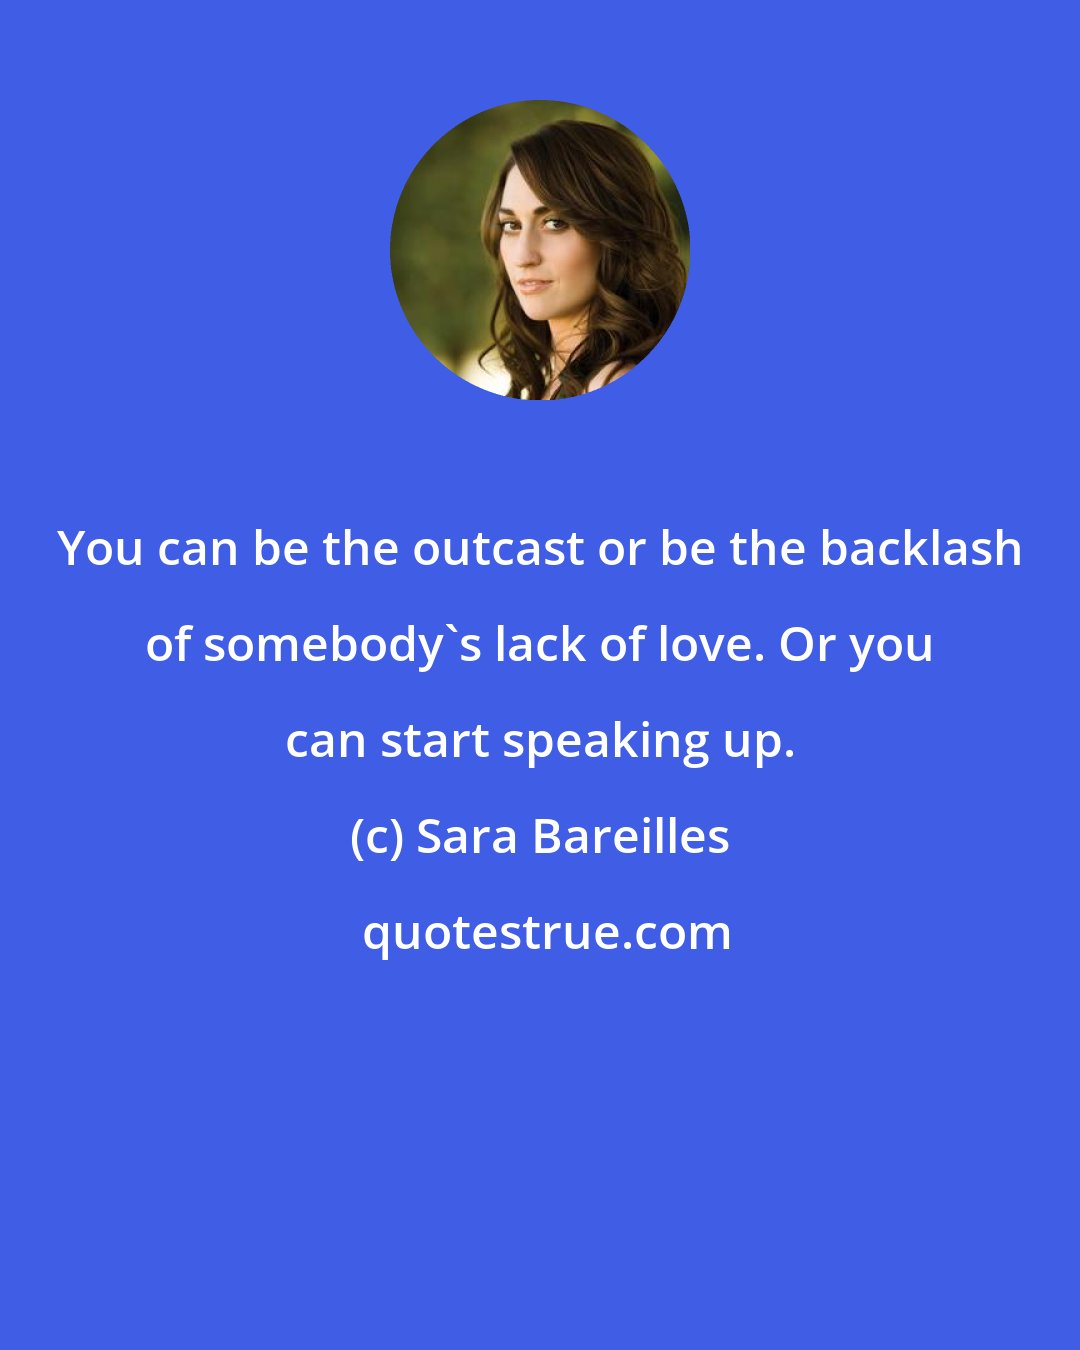 Sara Bareilles: You can be the outcast or be the backlash of somebody's lack of love. Or you can start speaking up.